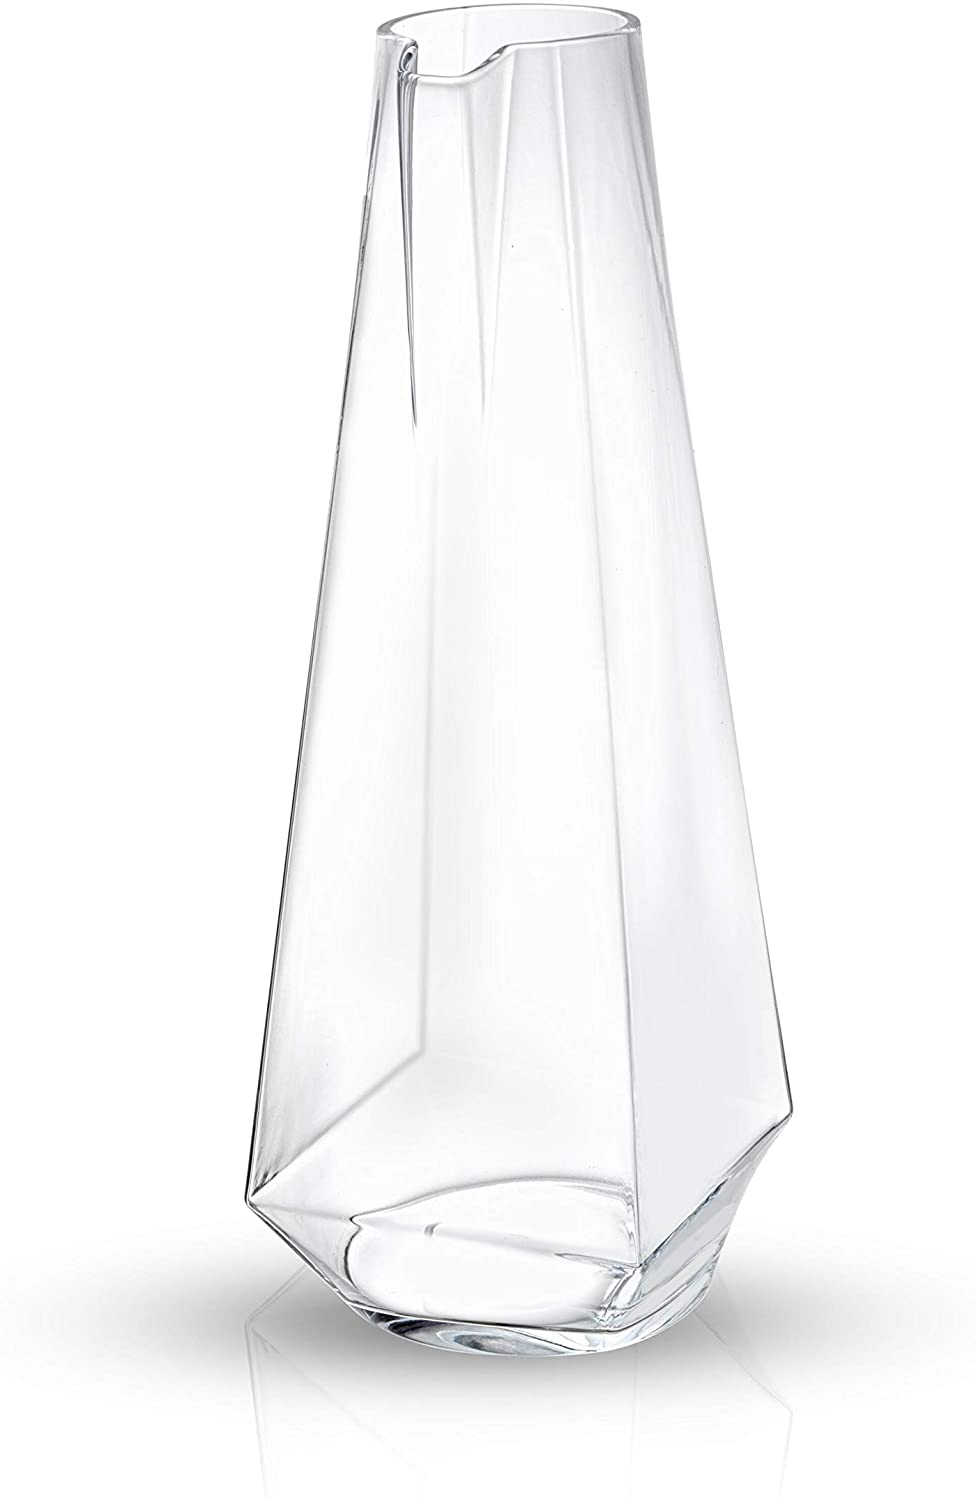 Unknown1 Beverage Pitcher 43oz Deluxe Glass Clear Crystal 1 Piece